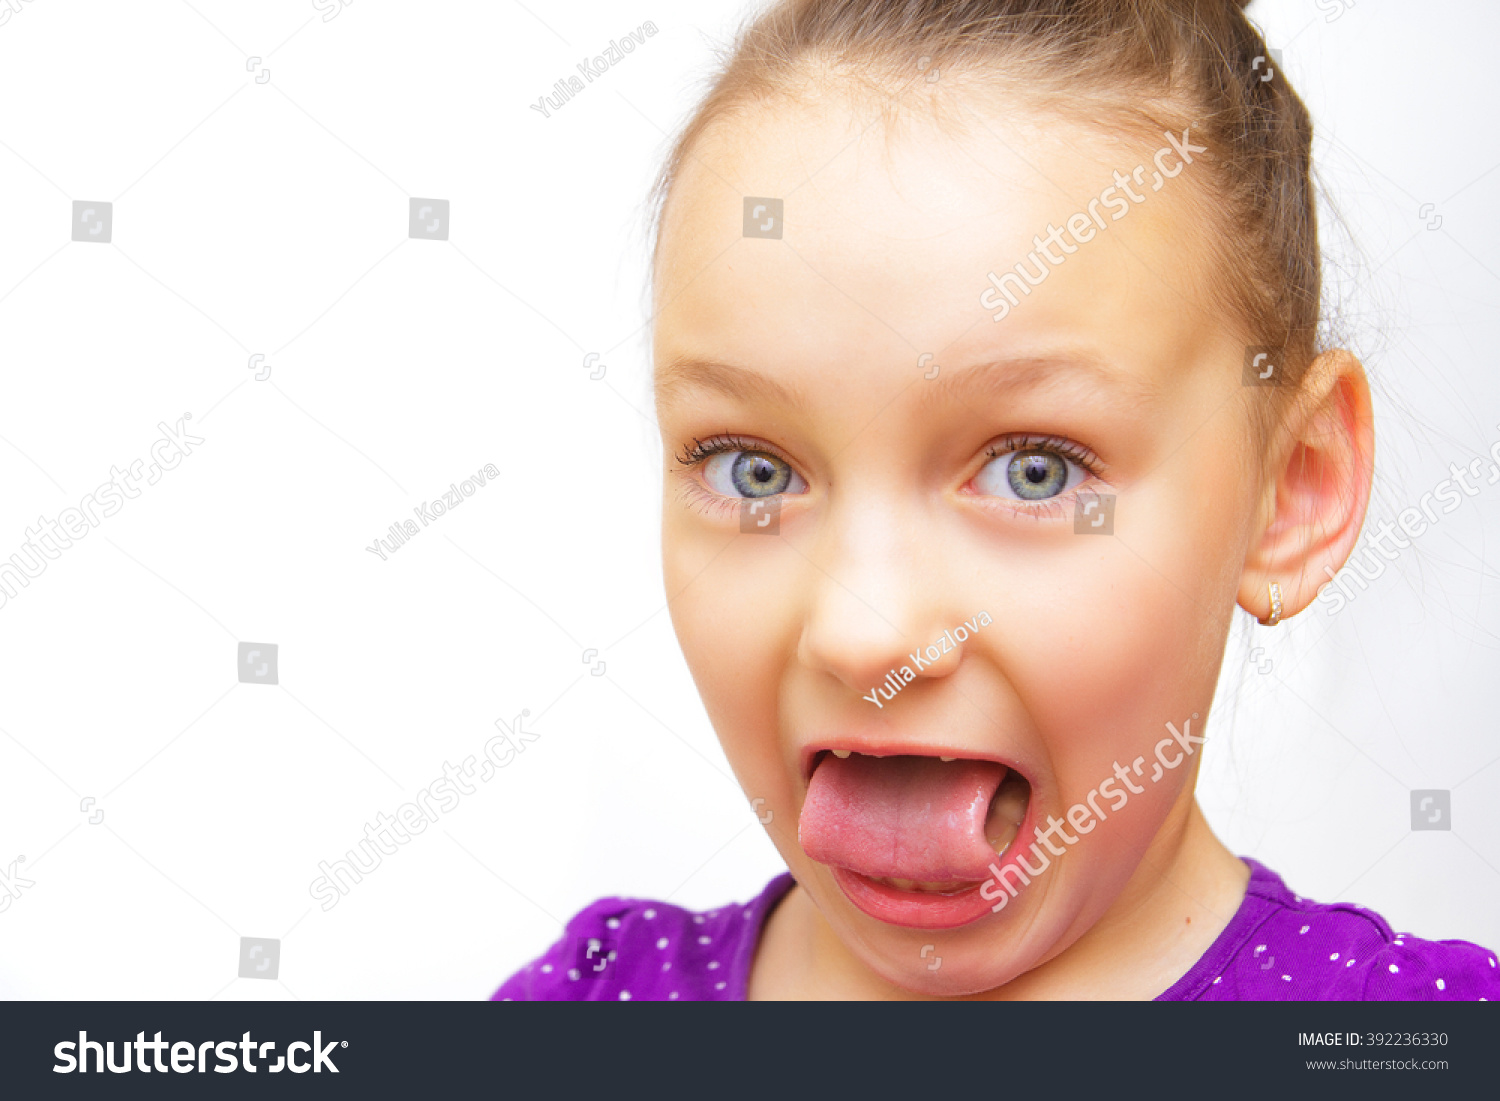 Girl Shows Tongue Grimaces Stock Photo 392236330 | Shutterstock